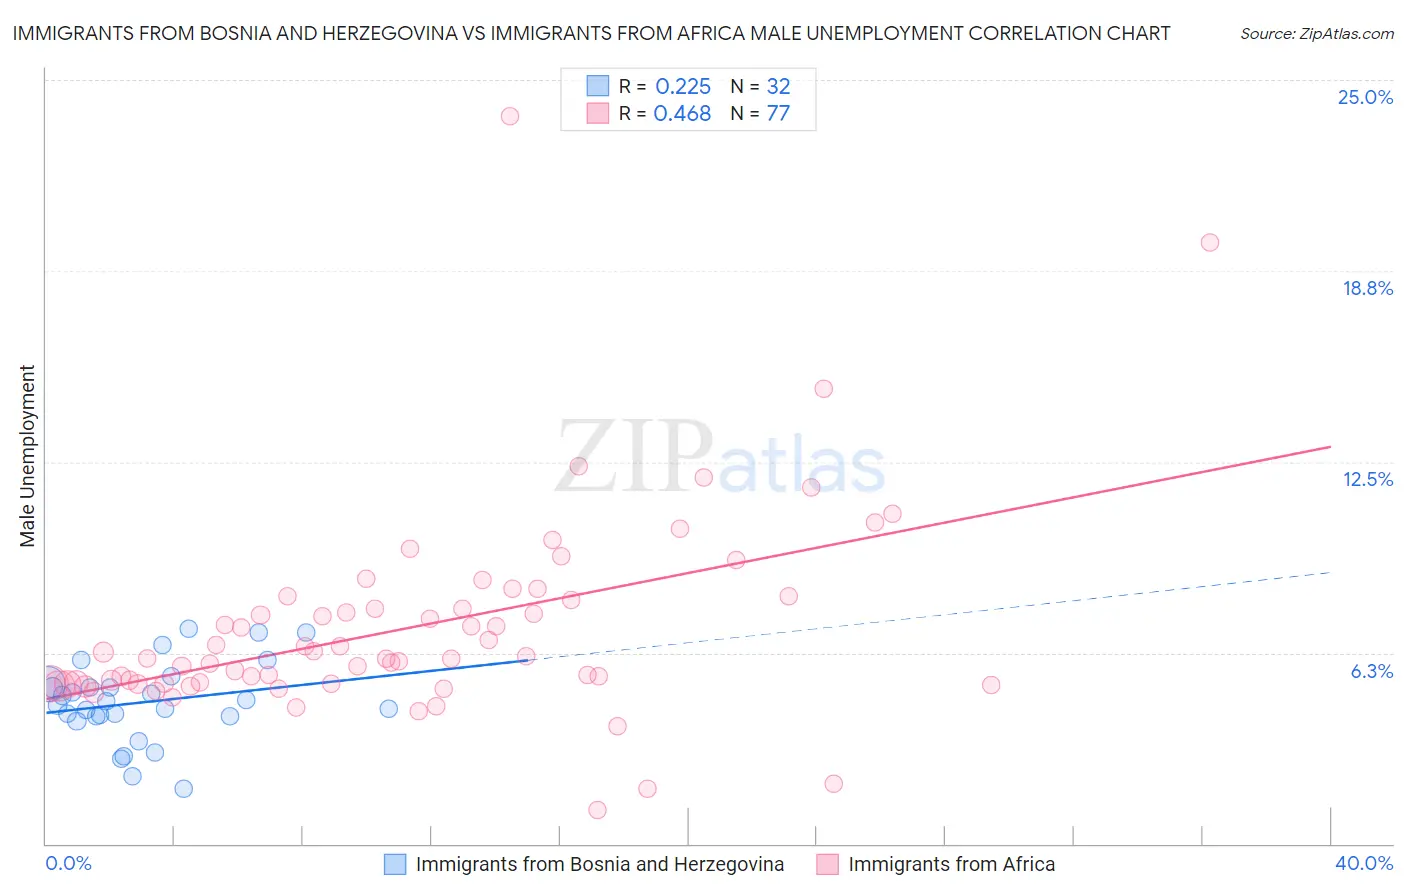 Immigrants from Bosnia and Herzegovina vs Immigrants from Africa Male Unemployment